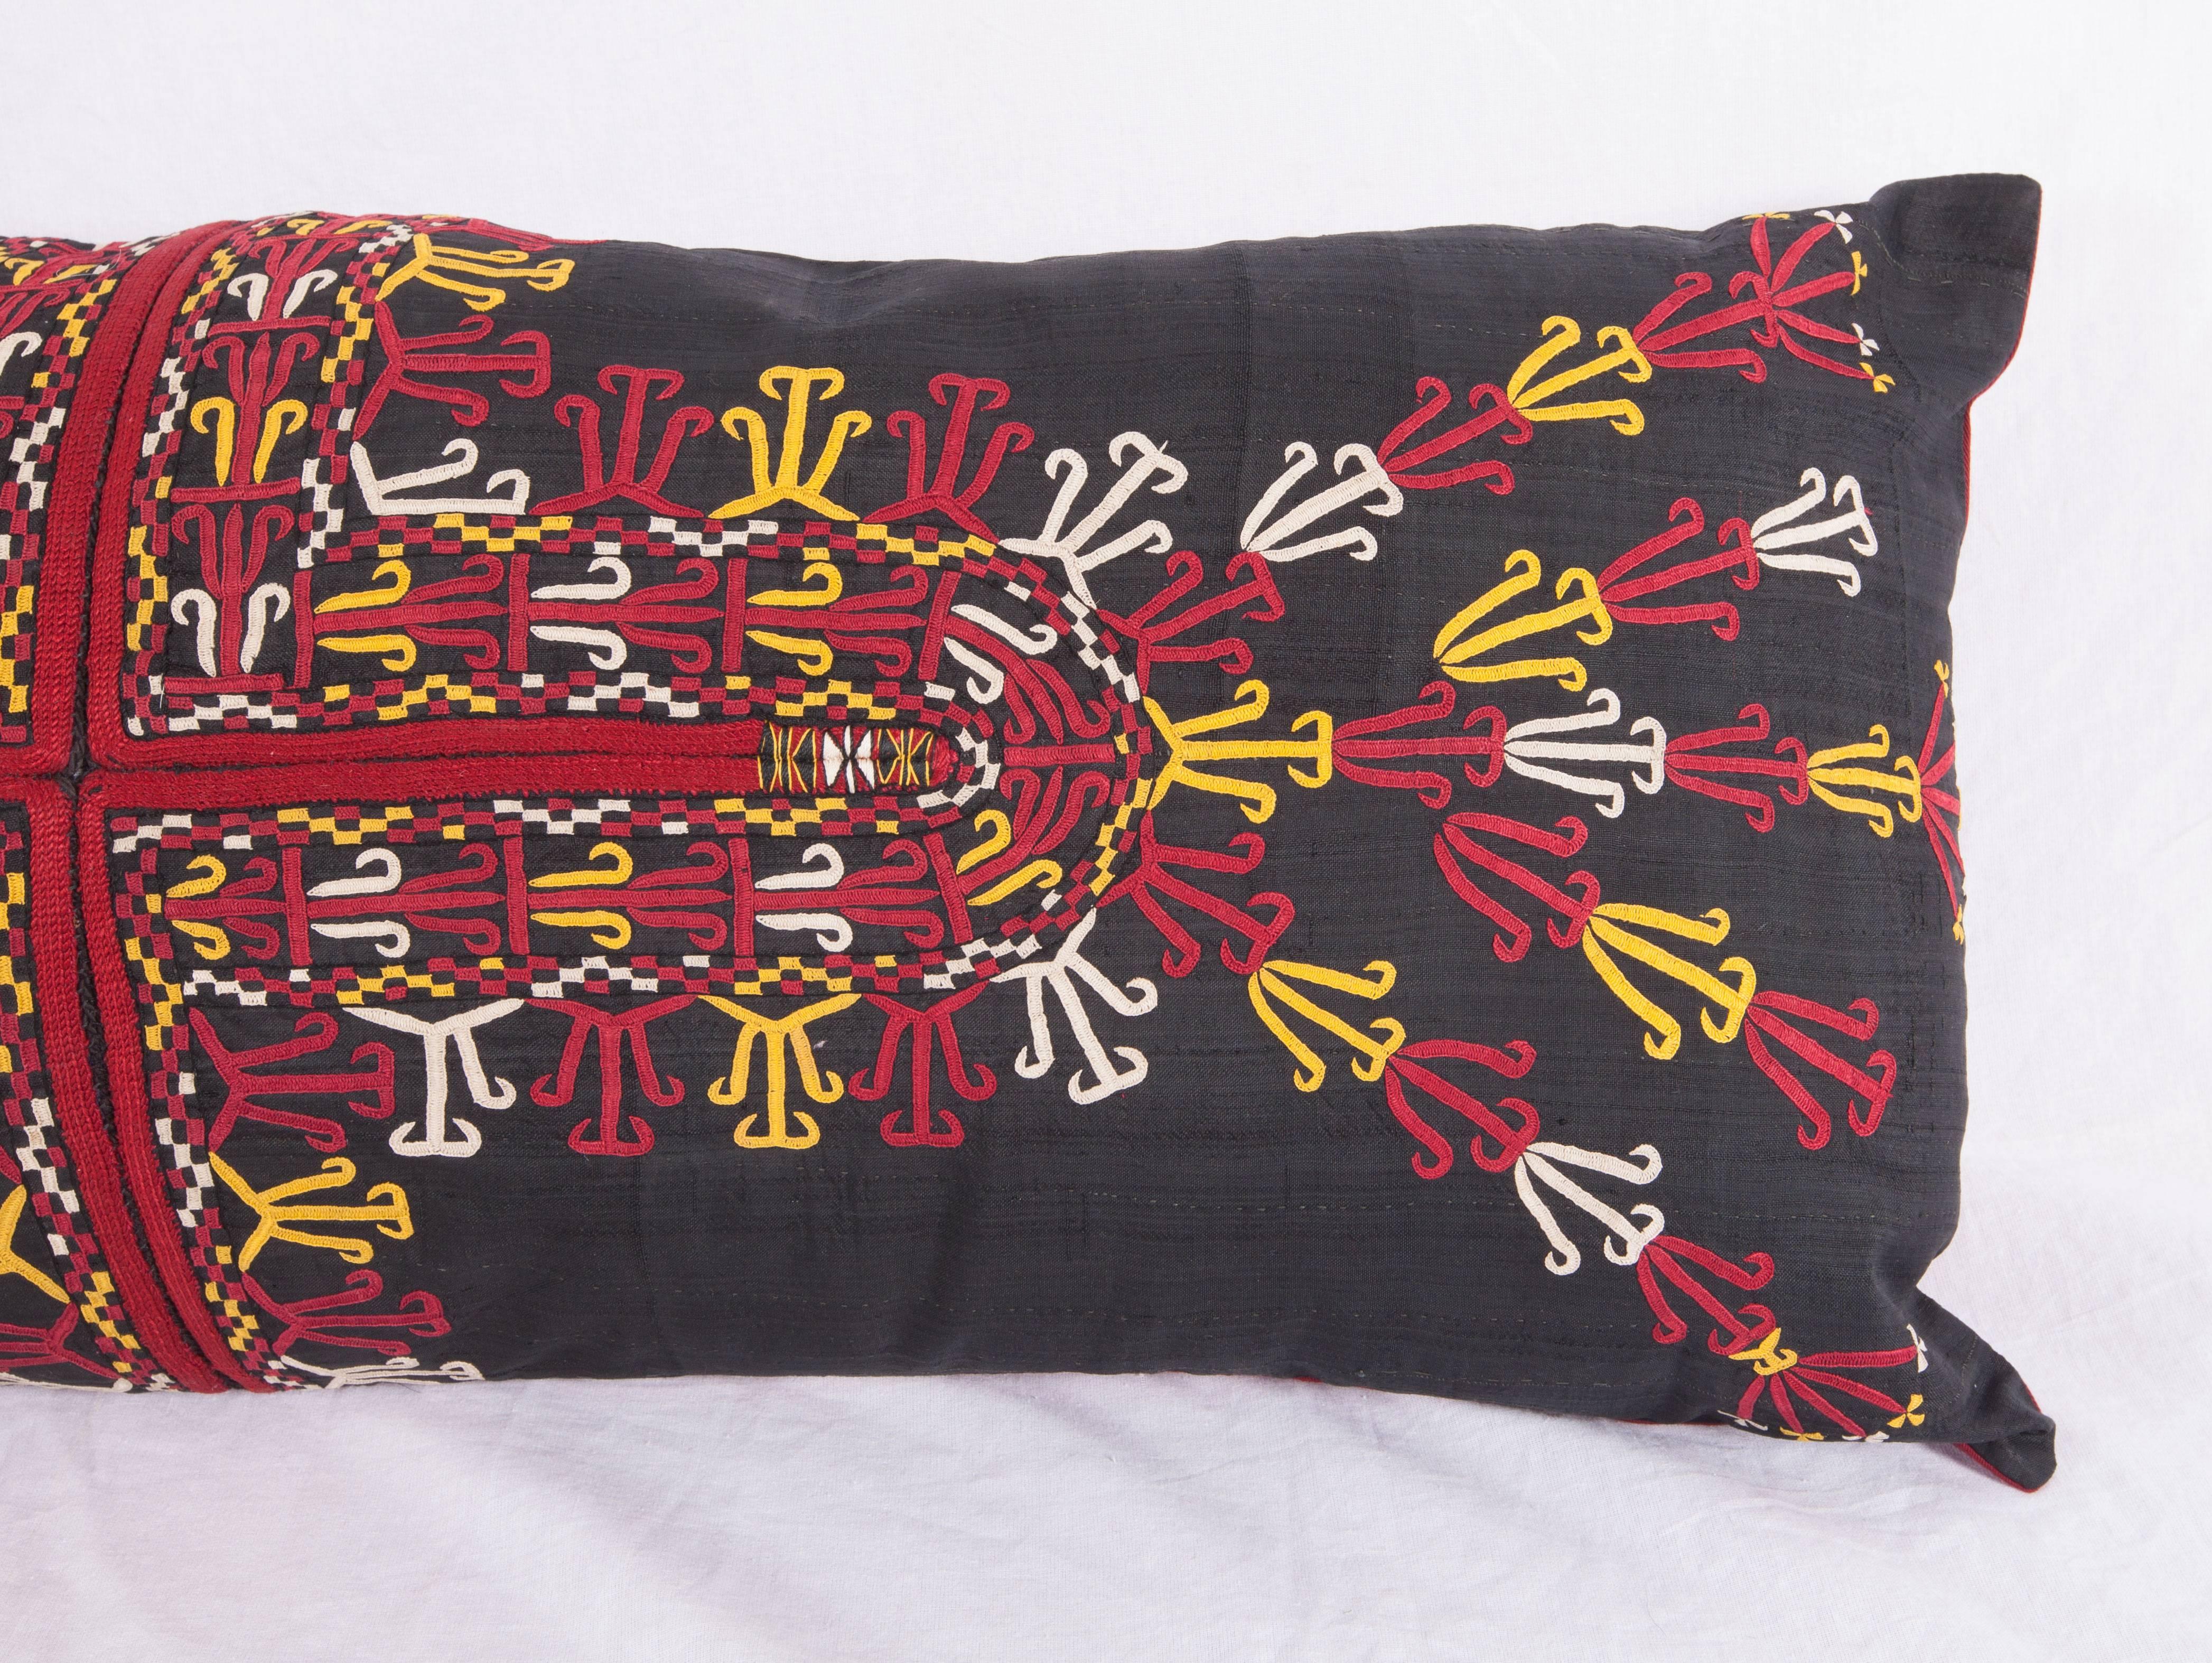 Suzani Pillow Case Fashioned from a Early 20th Century Turkmen Emroidered Silk Coat